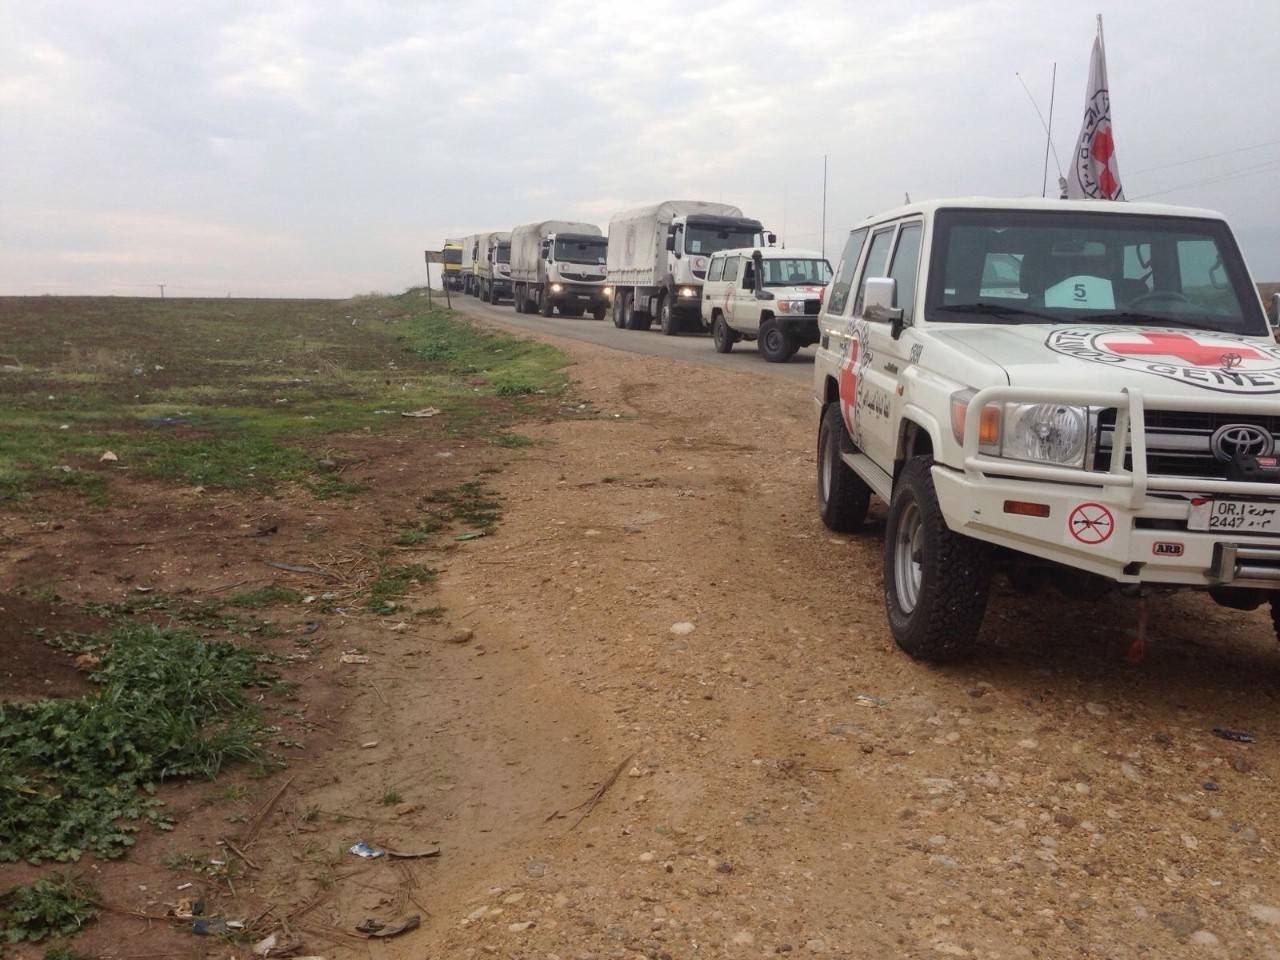 The International Committee of the Red Cross (ICRC), the Syrian Arab Red Crescent (SARC) and the United Nations deliver vital aid to people living in besieged areas in Syria.